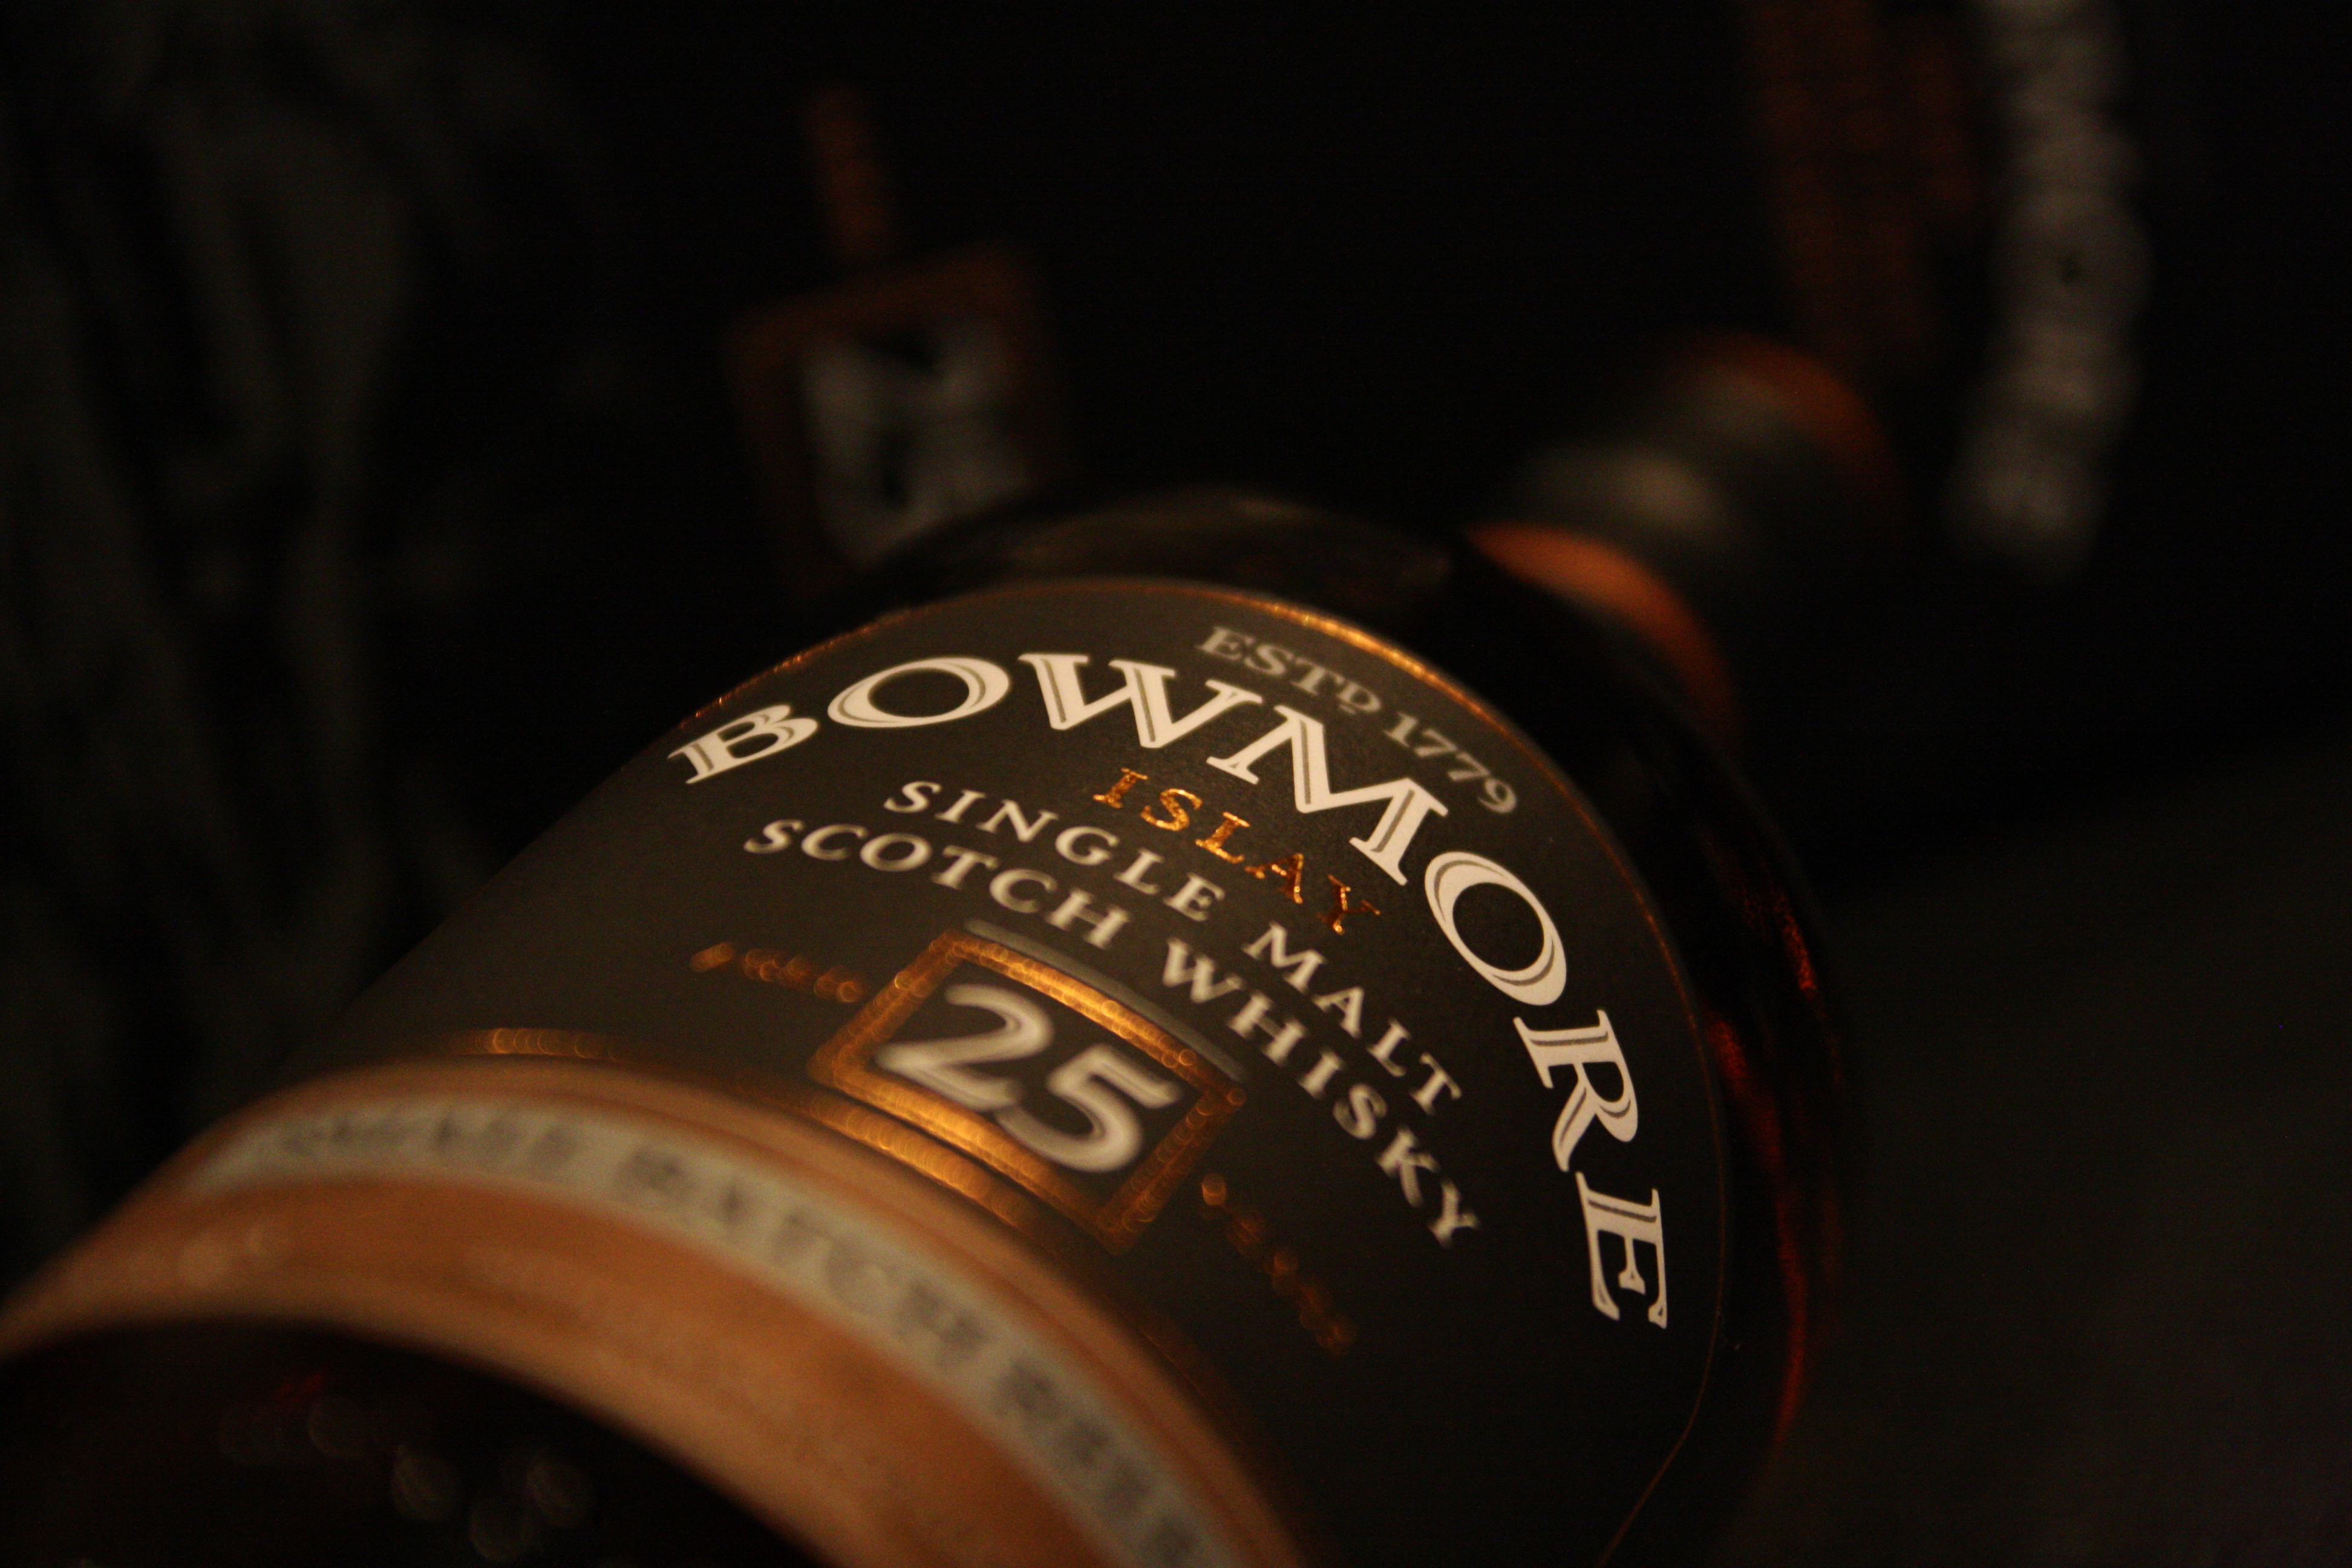 Bottles Alcohol Whisky Depth Of Field Isle Of Islay Scotch Bowmore 3888x2592